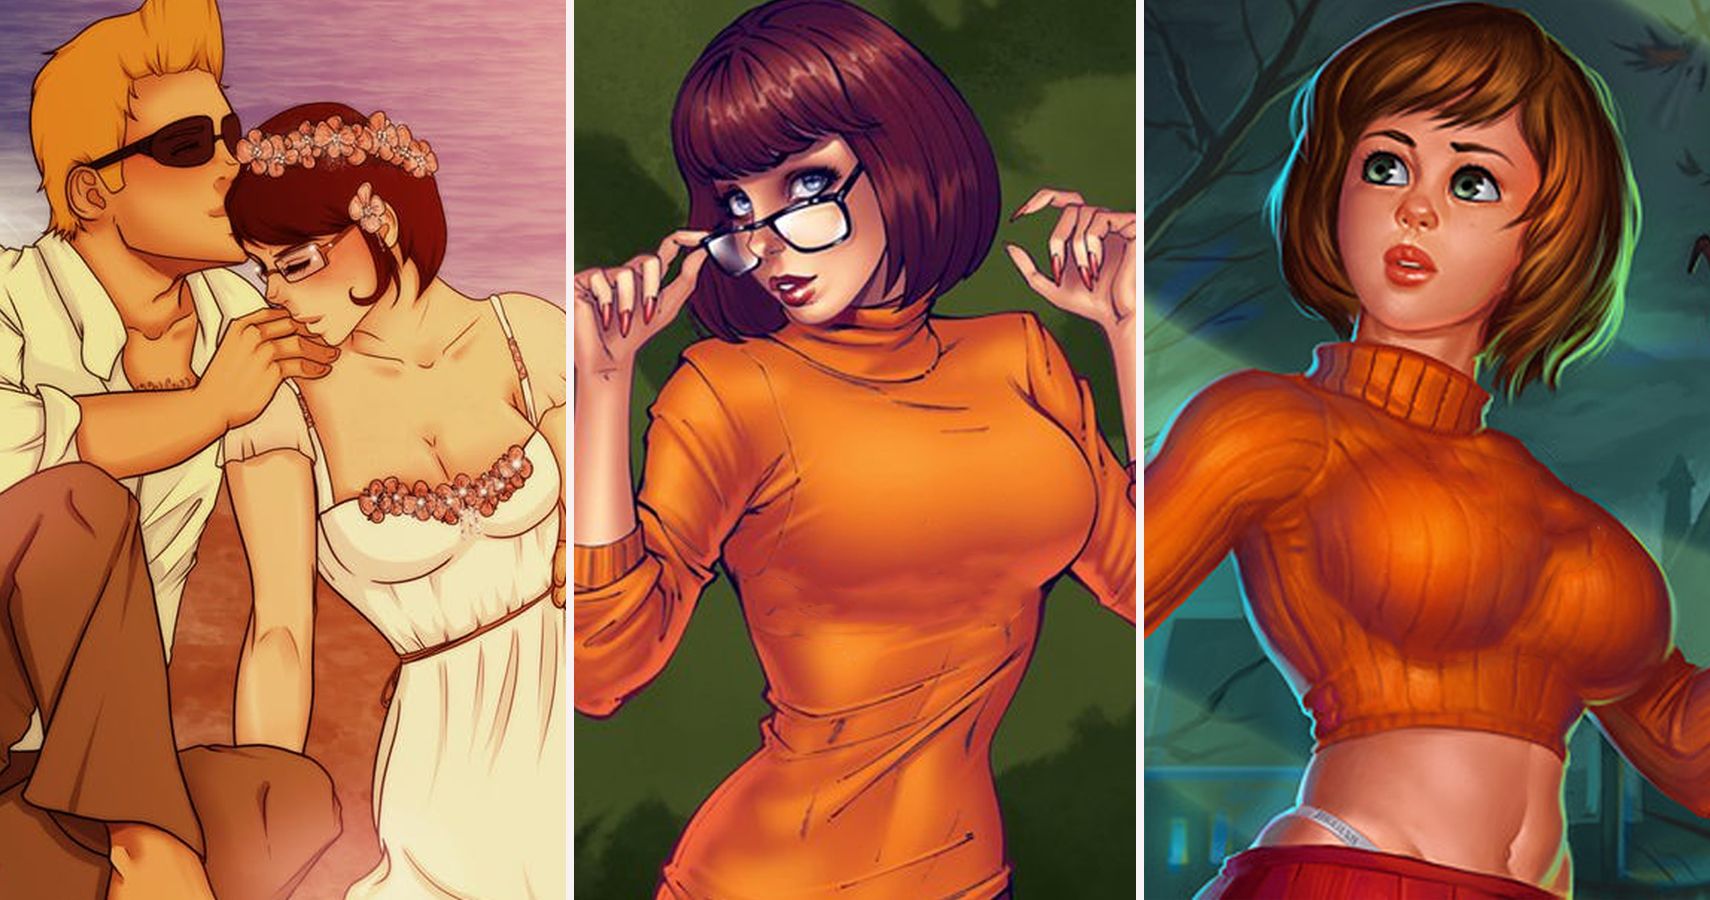 Scooby-Doo: 29 Photos Of Velma That The Scooby Gang Is Proud Of.